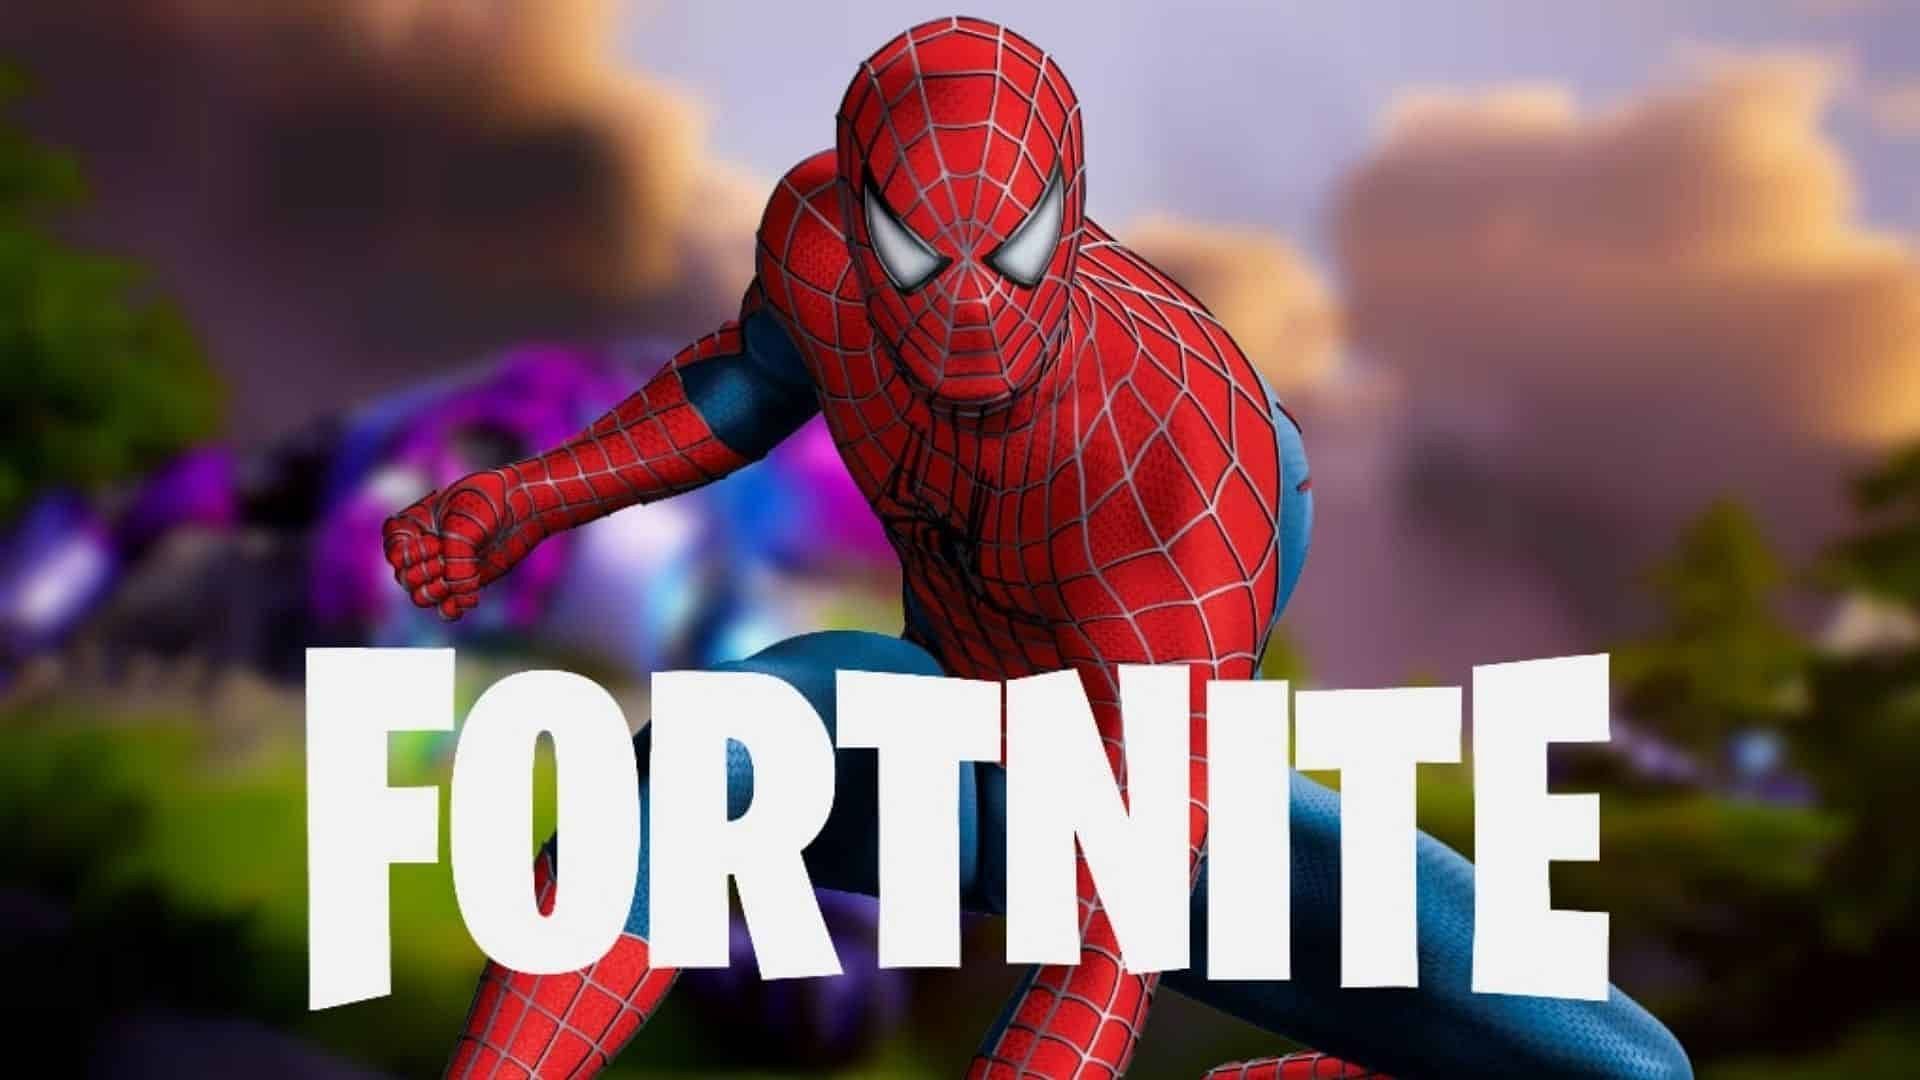 Spider-Man swings into Fortnite and spawns around the Daily Bugle (Image via Epic Games)